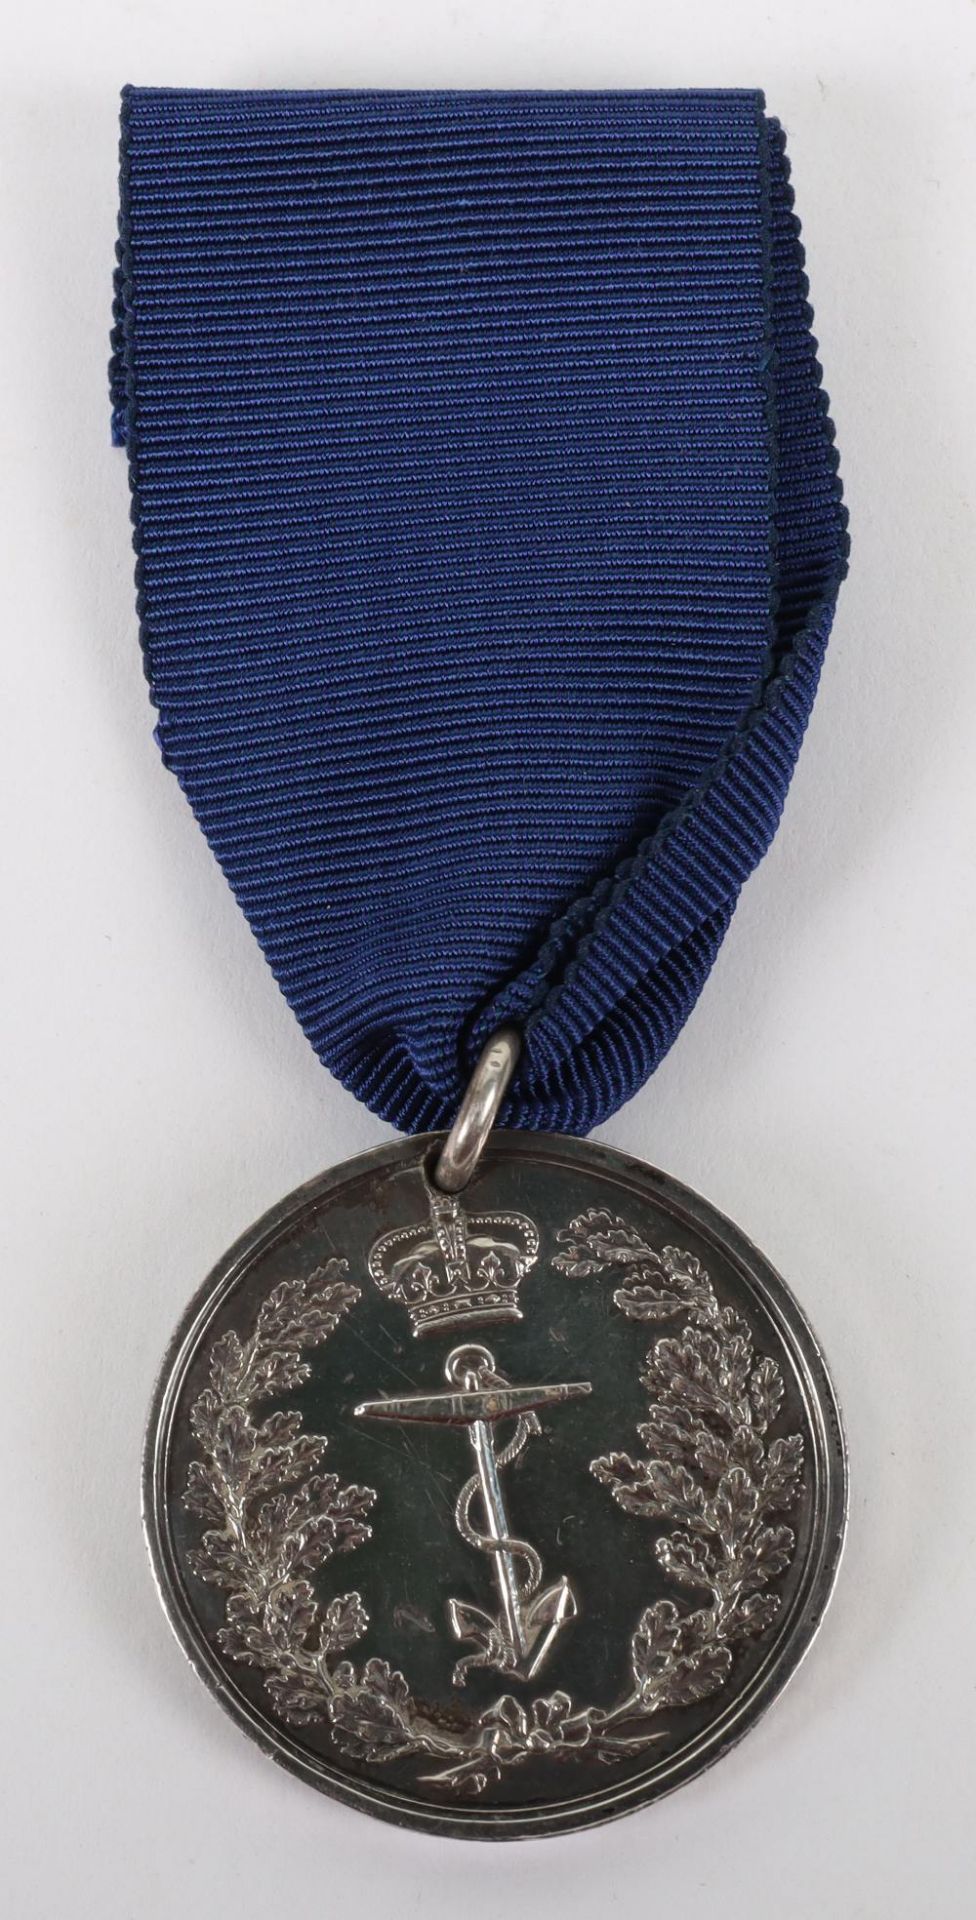 Scarce Royal Navy Long Service and Good Conduct Medal with the Anchor Obverse HMS Edinburgh